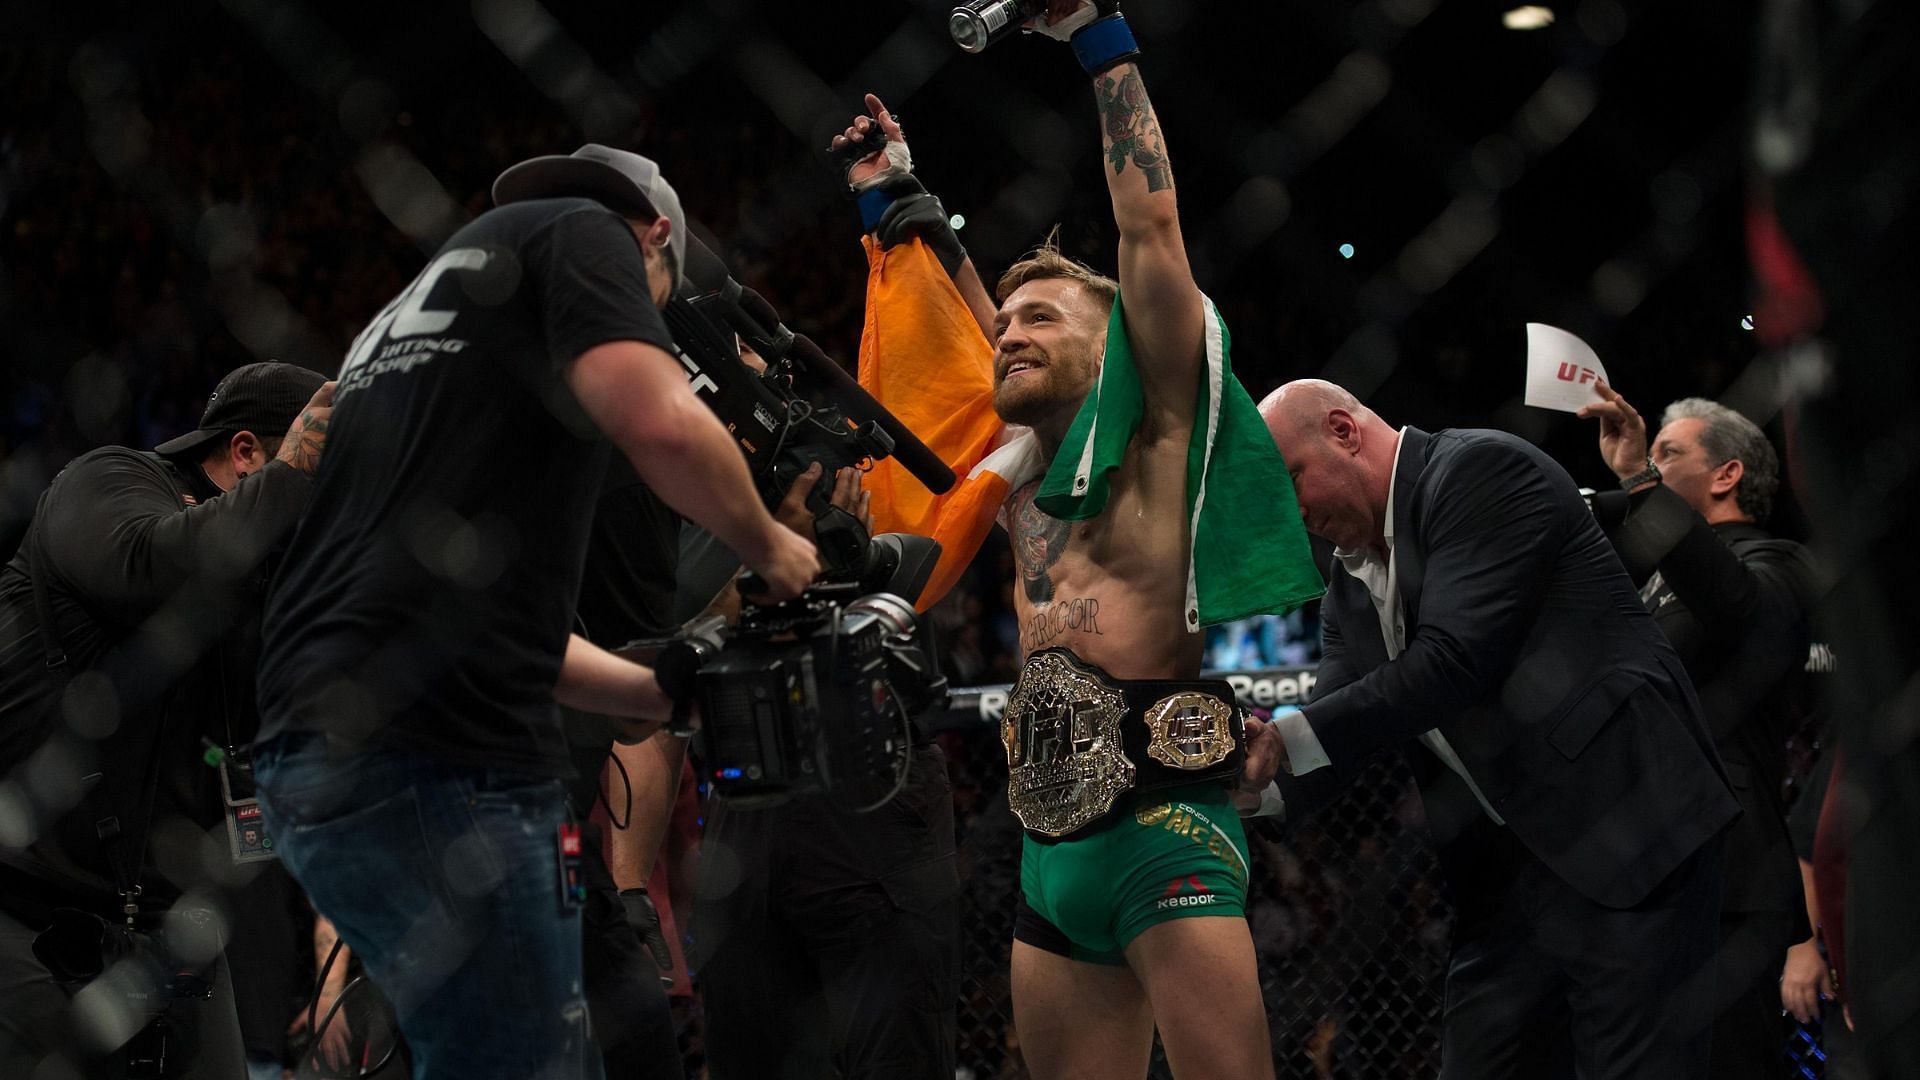 Conor McGregor wins the UFC featherweight title (Image courtesy of ufc.com)